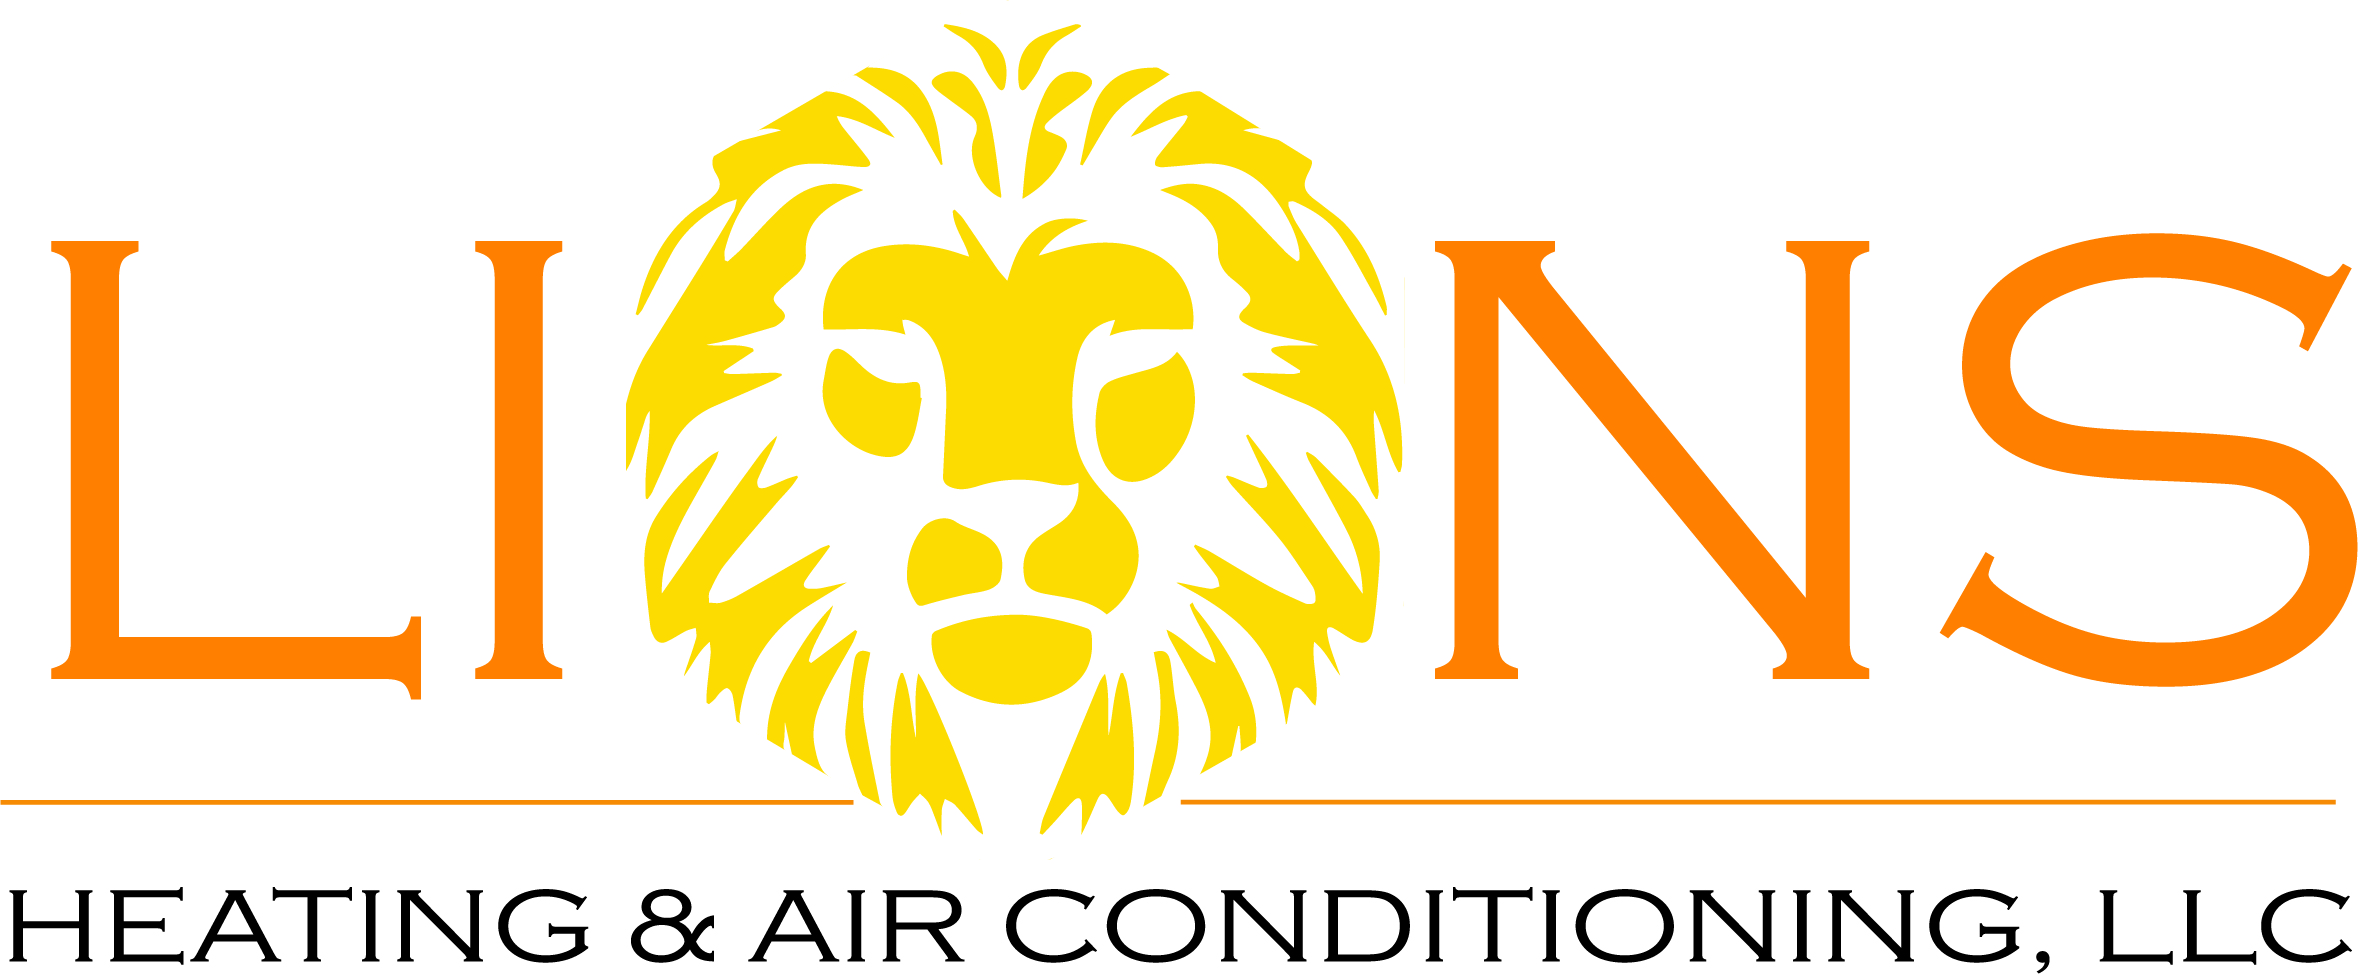 Lions Heating And Air Conditioning